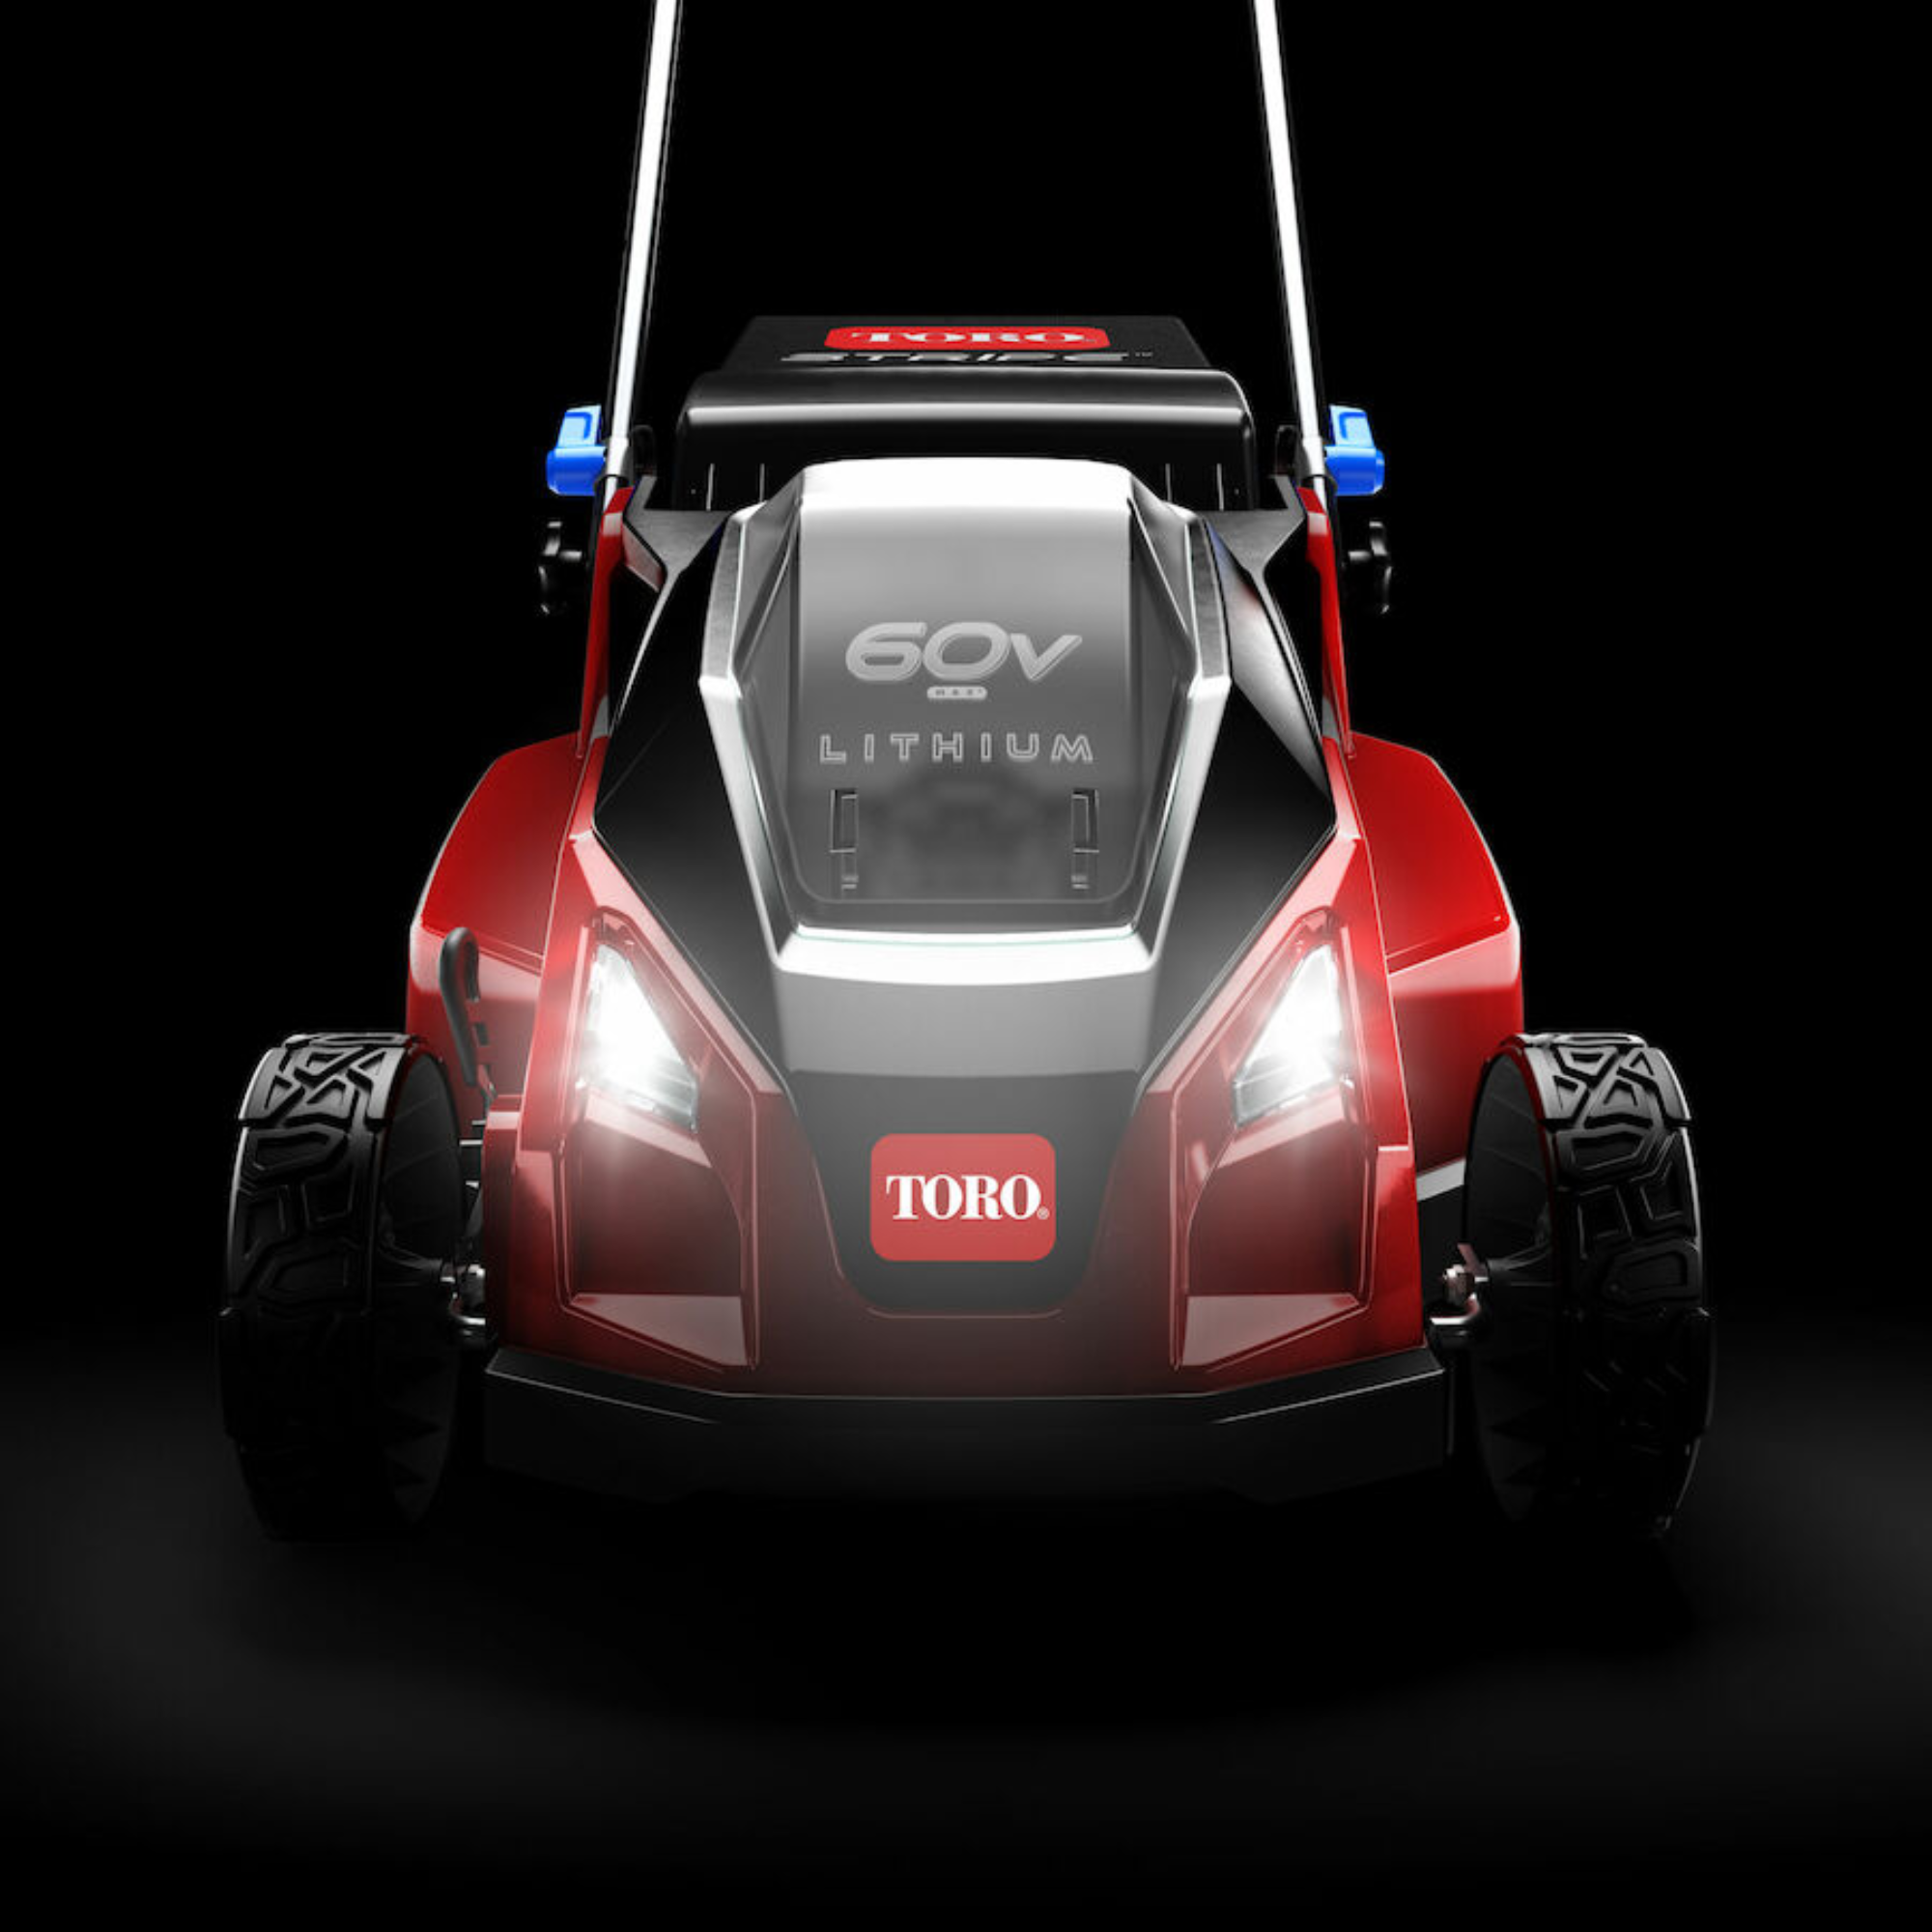 Toro 60V MAX Stripe Self-Propelled Mower - 6.0Ah Battery / Charger Included | 21 in. Deck | 21621